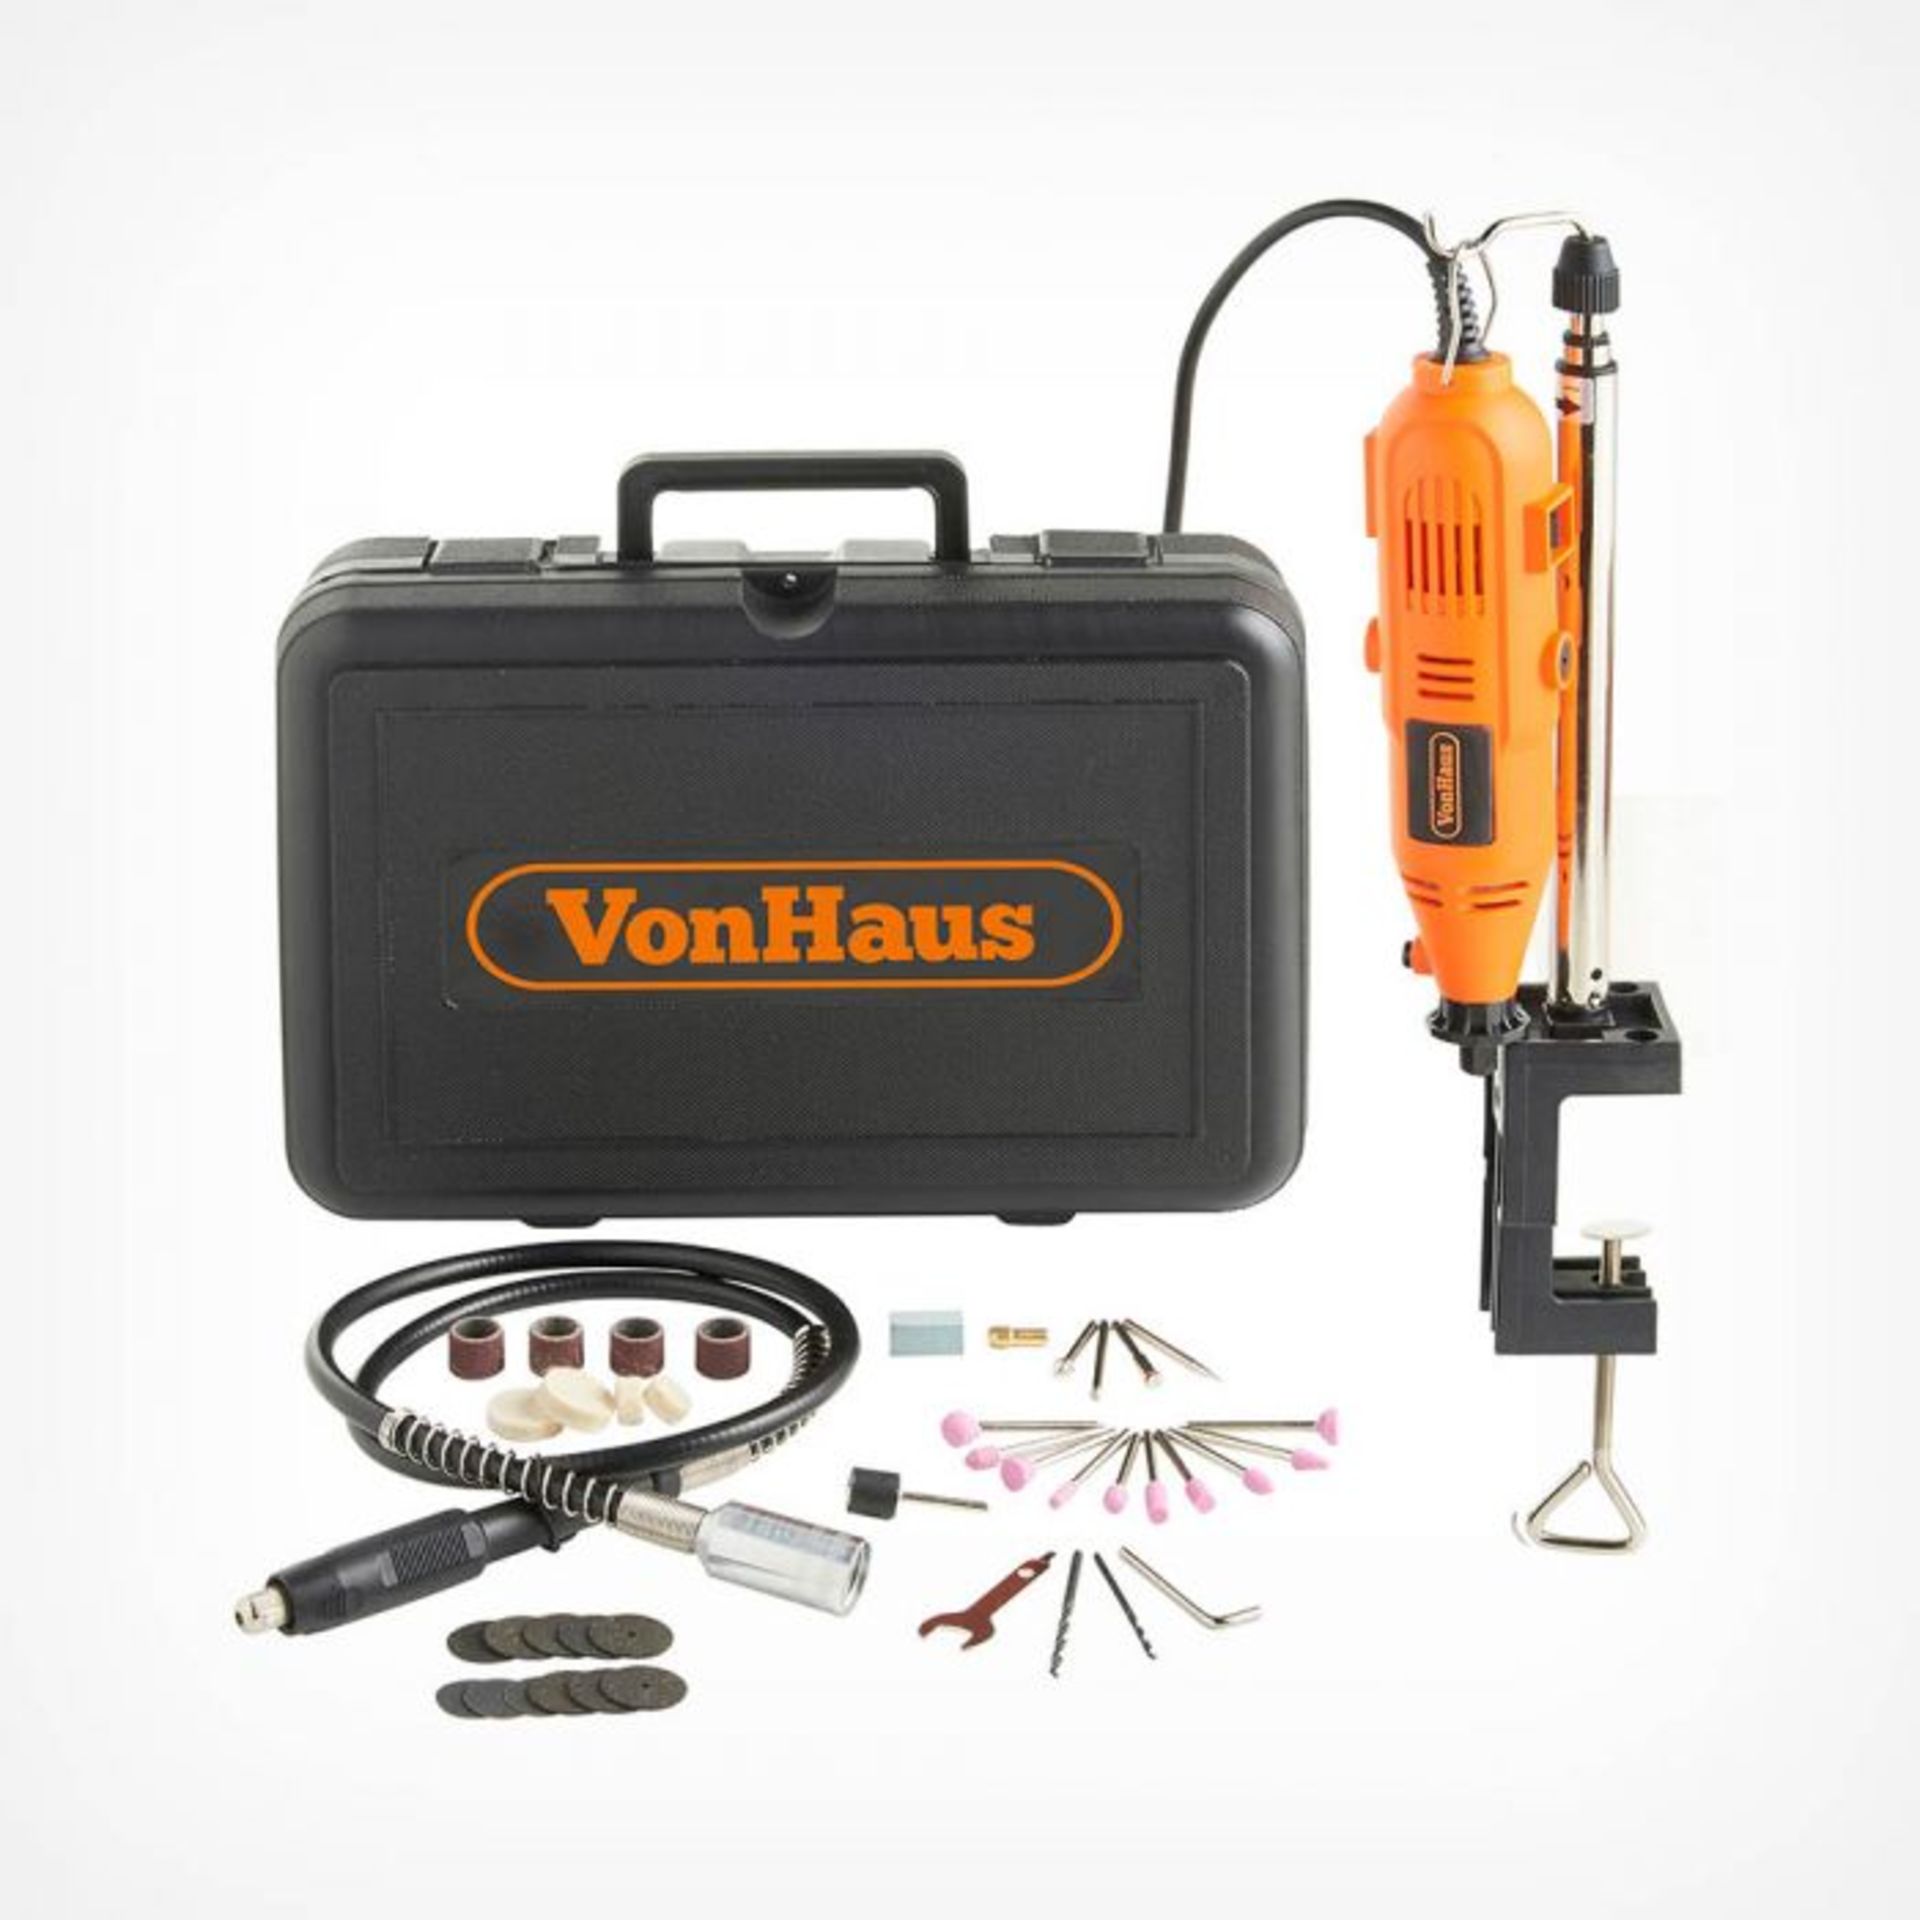 135W Multitool with Accessory Set. Perfect for a host of jobs including chainsaw sharpening, tile